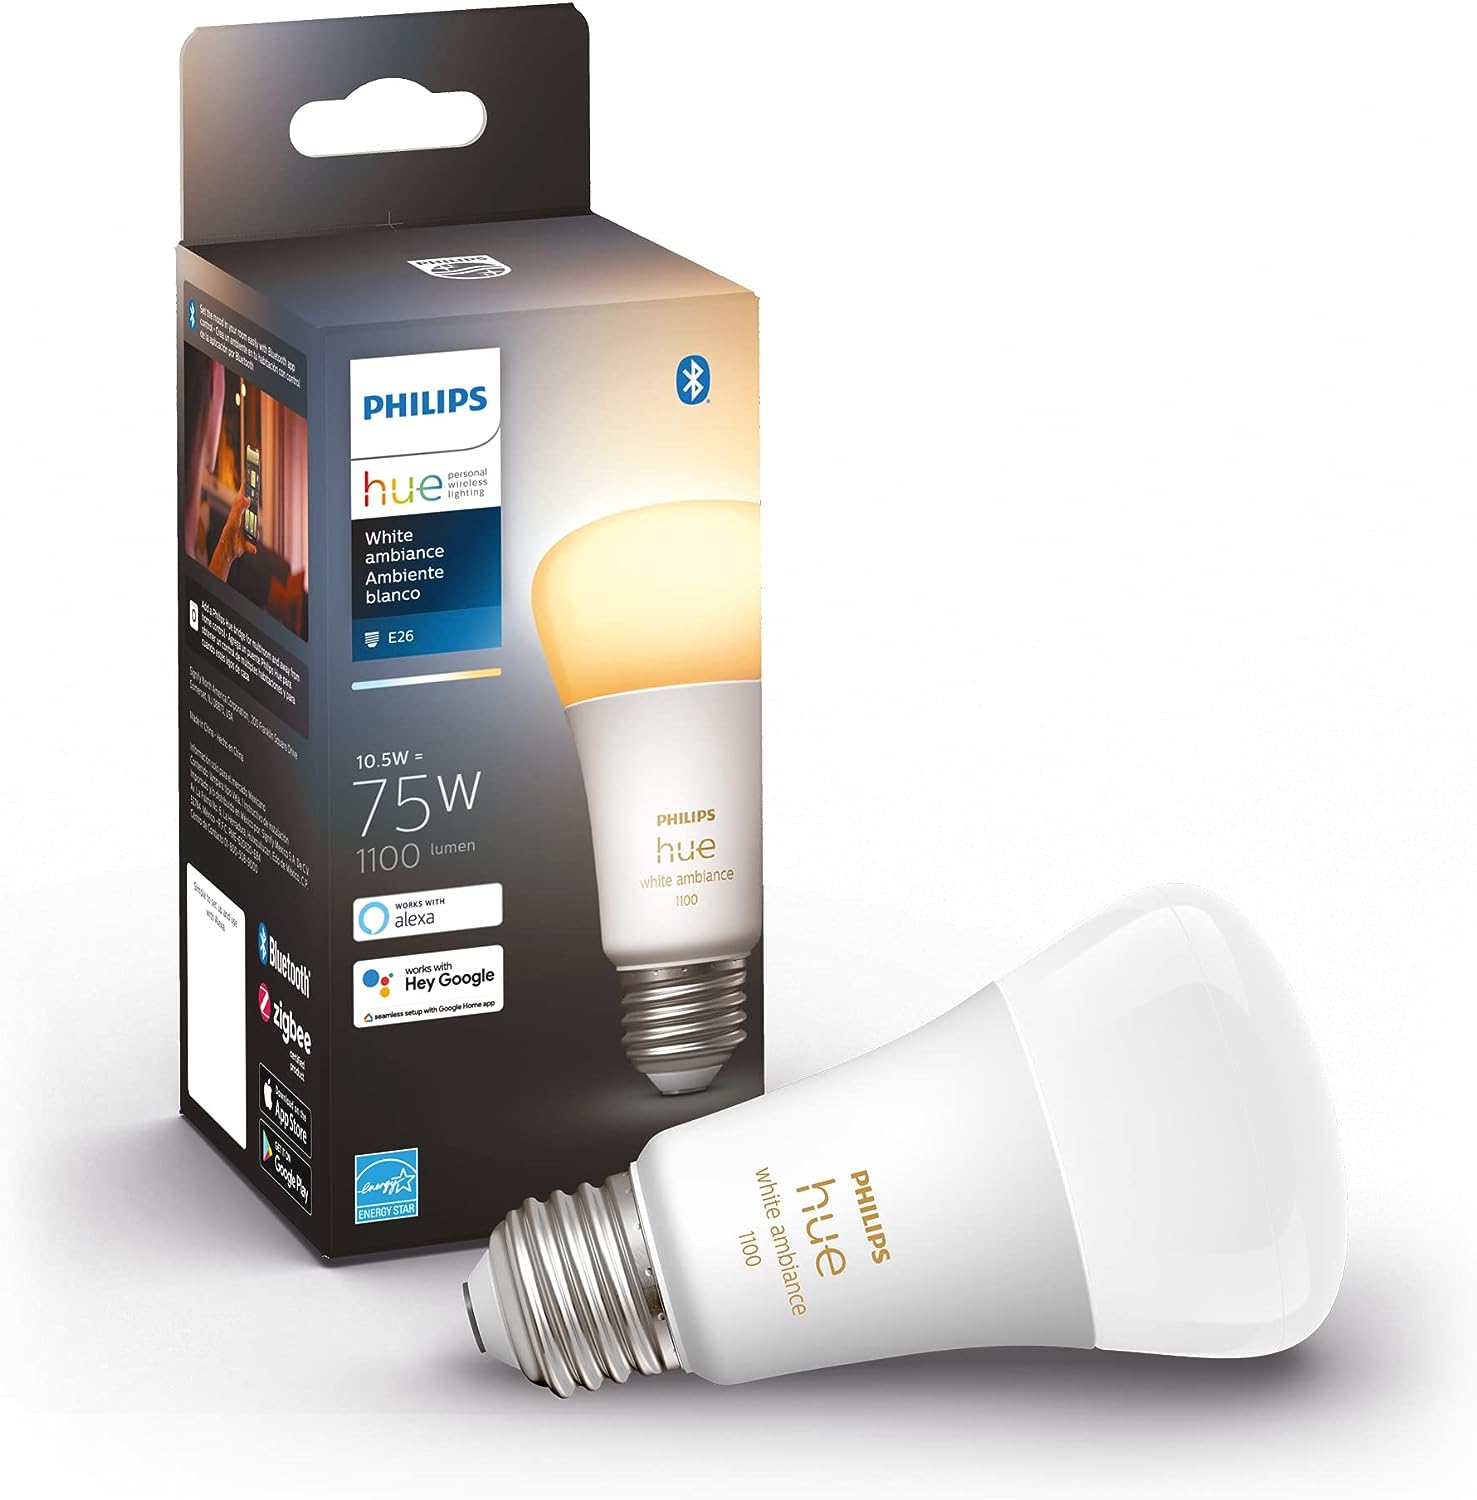 75W Philips Hue Smart A19 1100LM E26 LED Bulb (White Ambiance) $16 + Free Shipping w/ Prime or on $35+